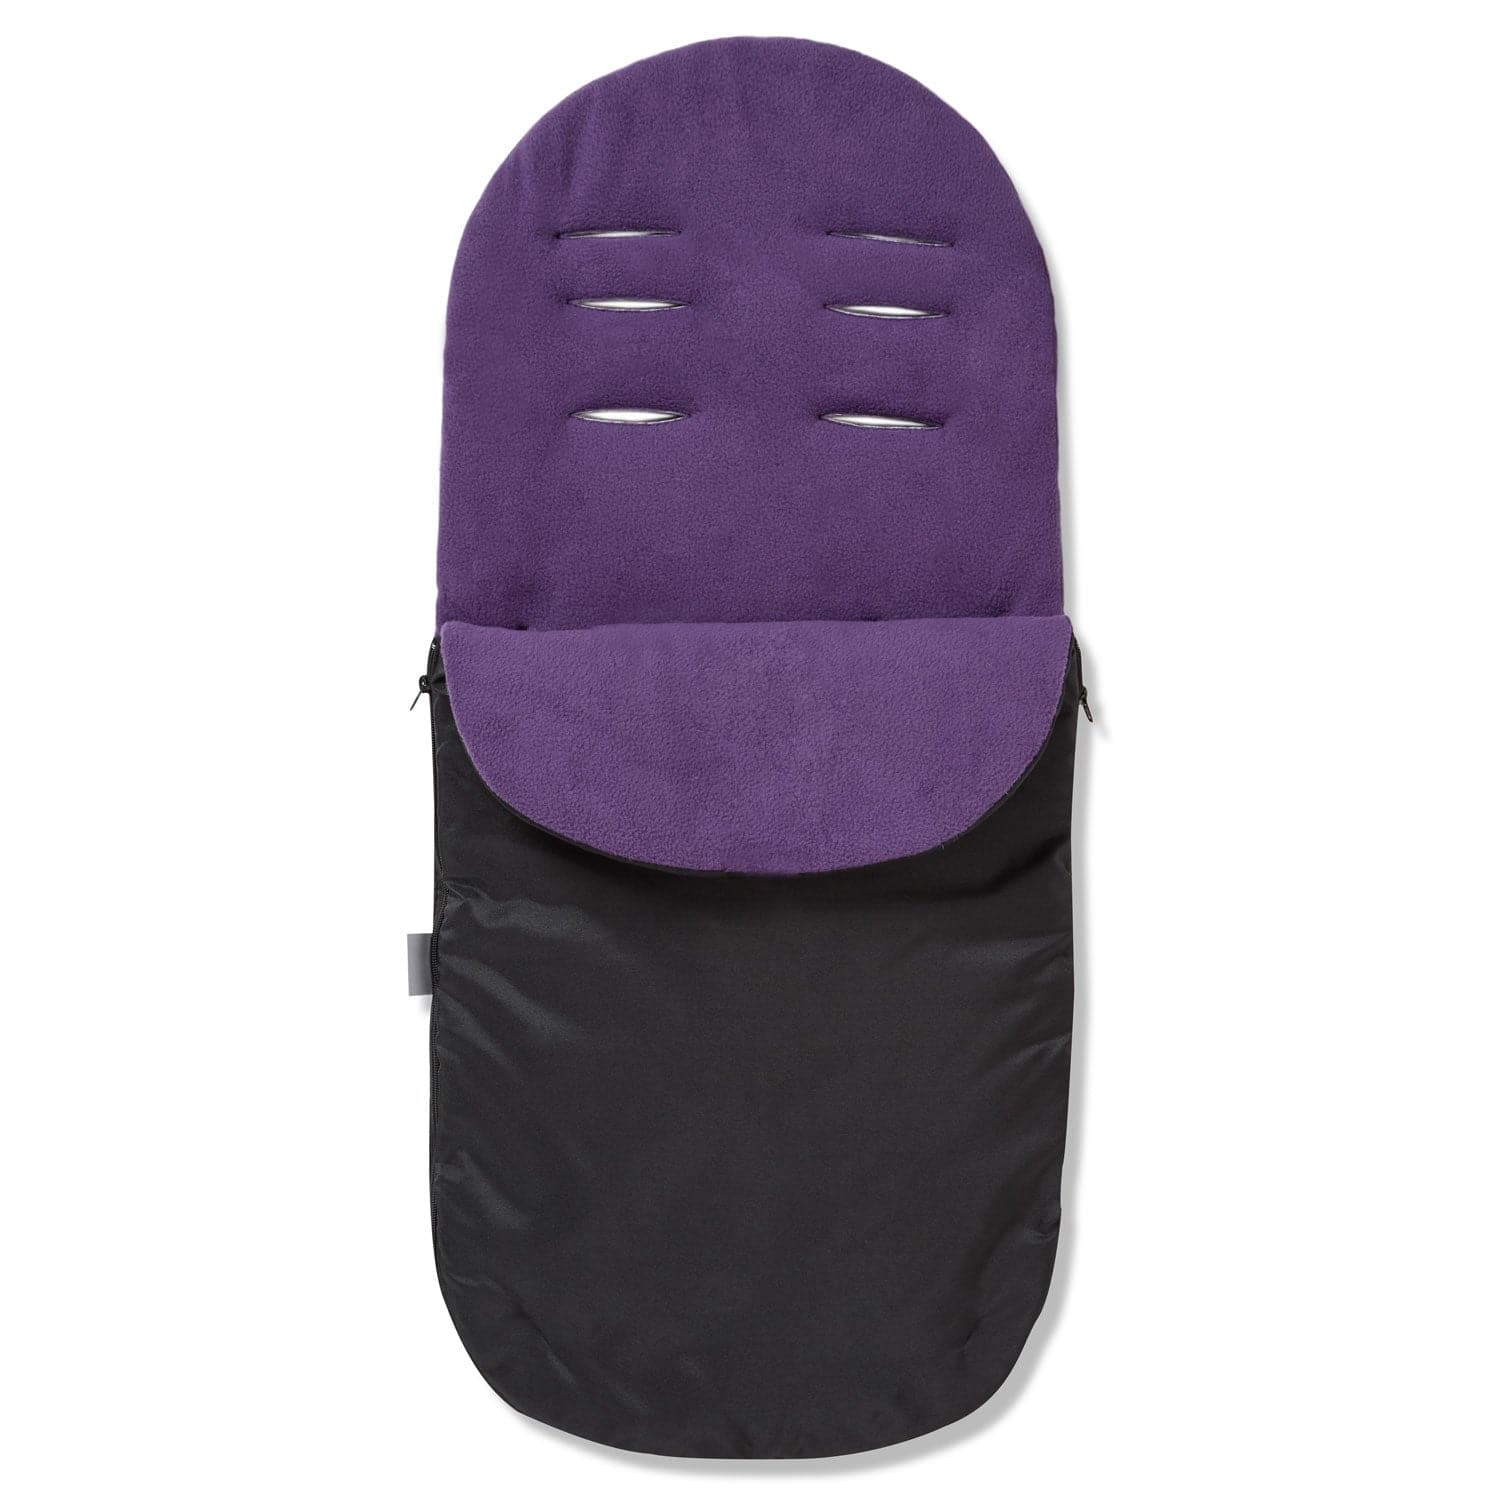 Footmuff / Cosy Toes Compatible with Venicci - Purple / Fits All Models | For Your Little One